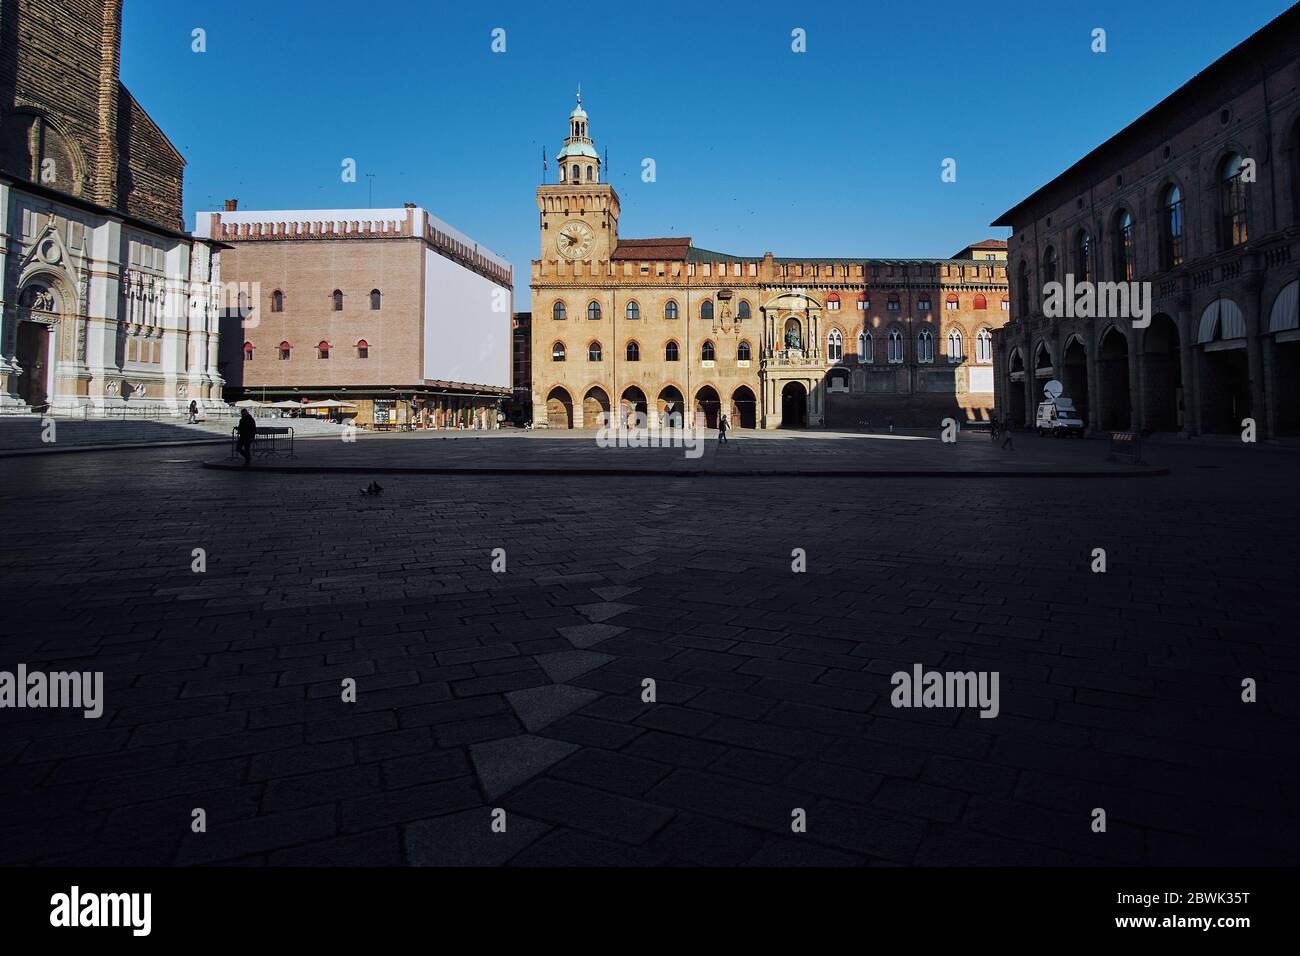 Bologna, Italy - May 21 2020:Palazzo d'Accursio, where the city's political activities reside. Stock Photo